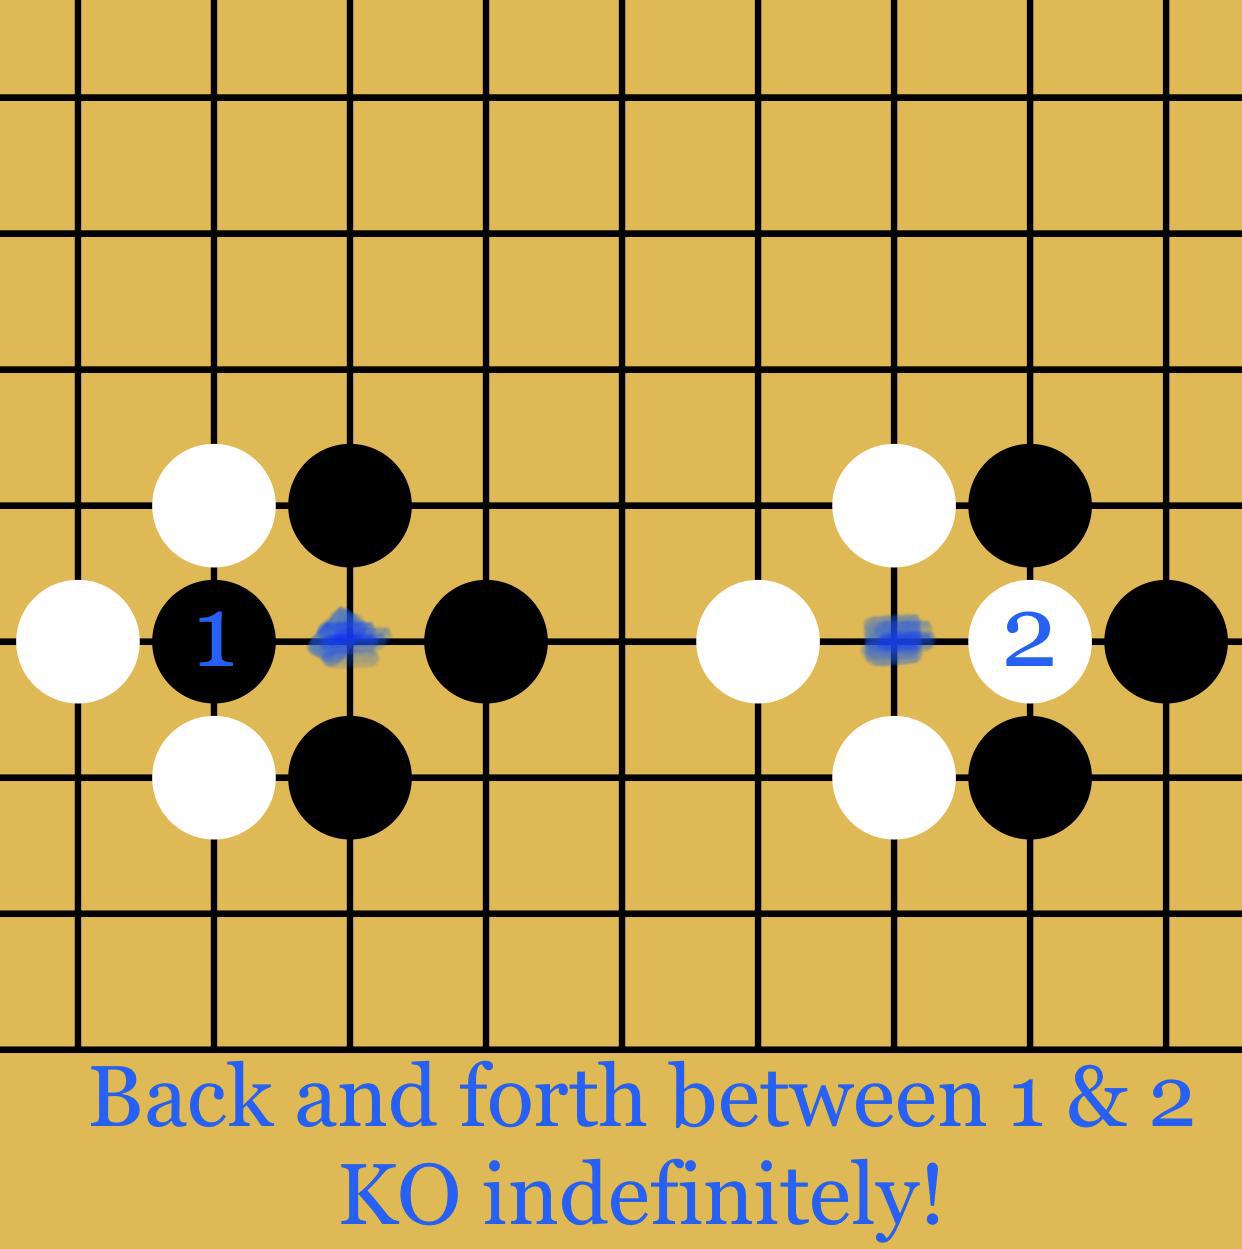 How eyes work in the game of go.